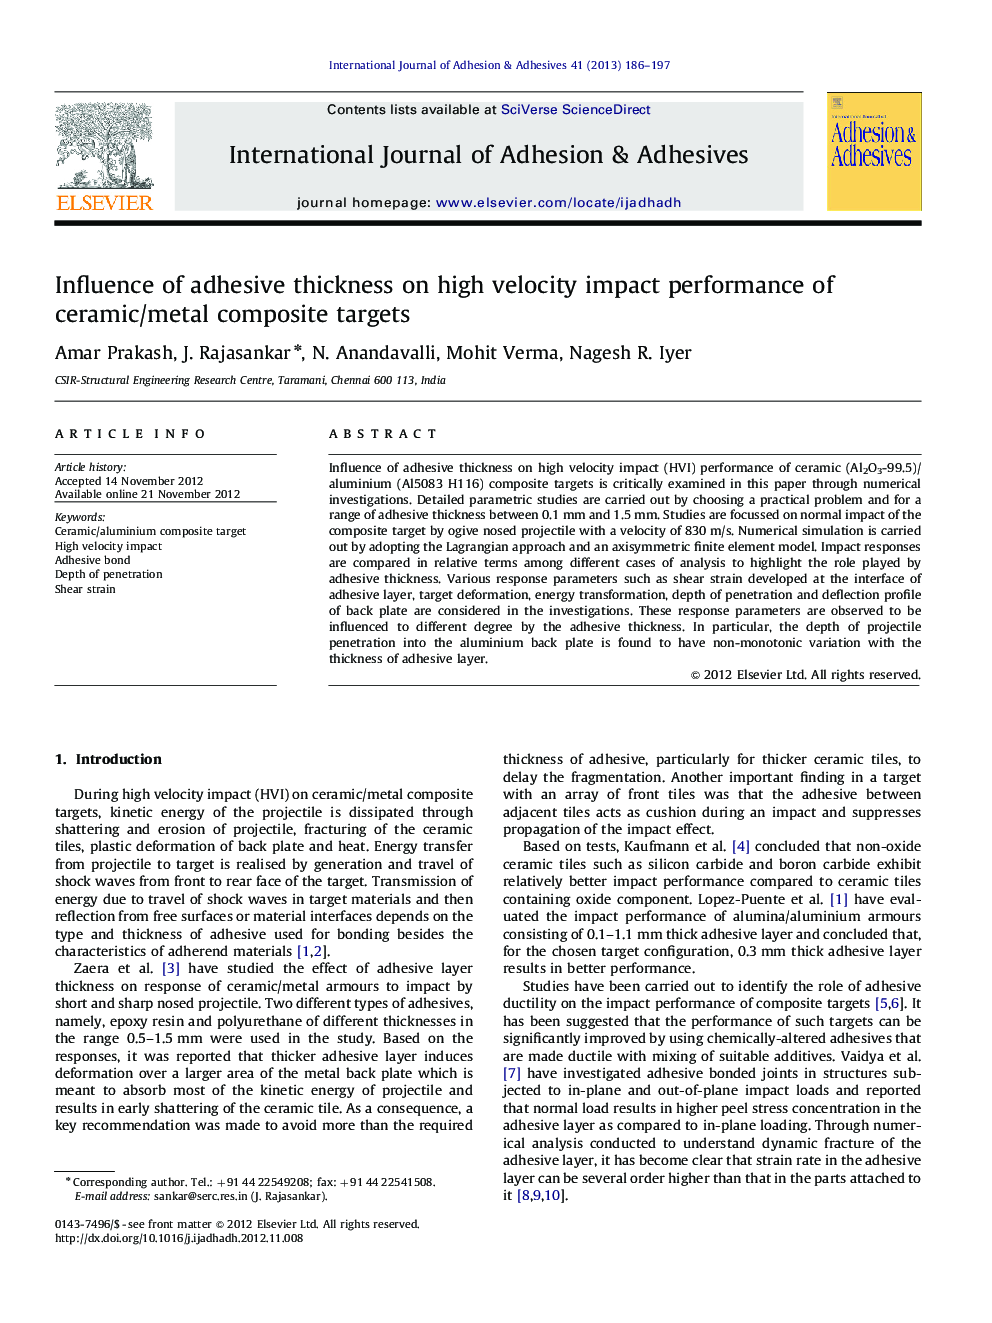 Influence of adhesive thickness on high velocity impact performance of ceramic/metal composite targets